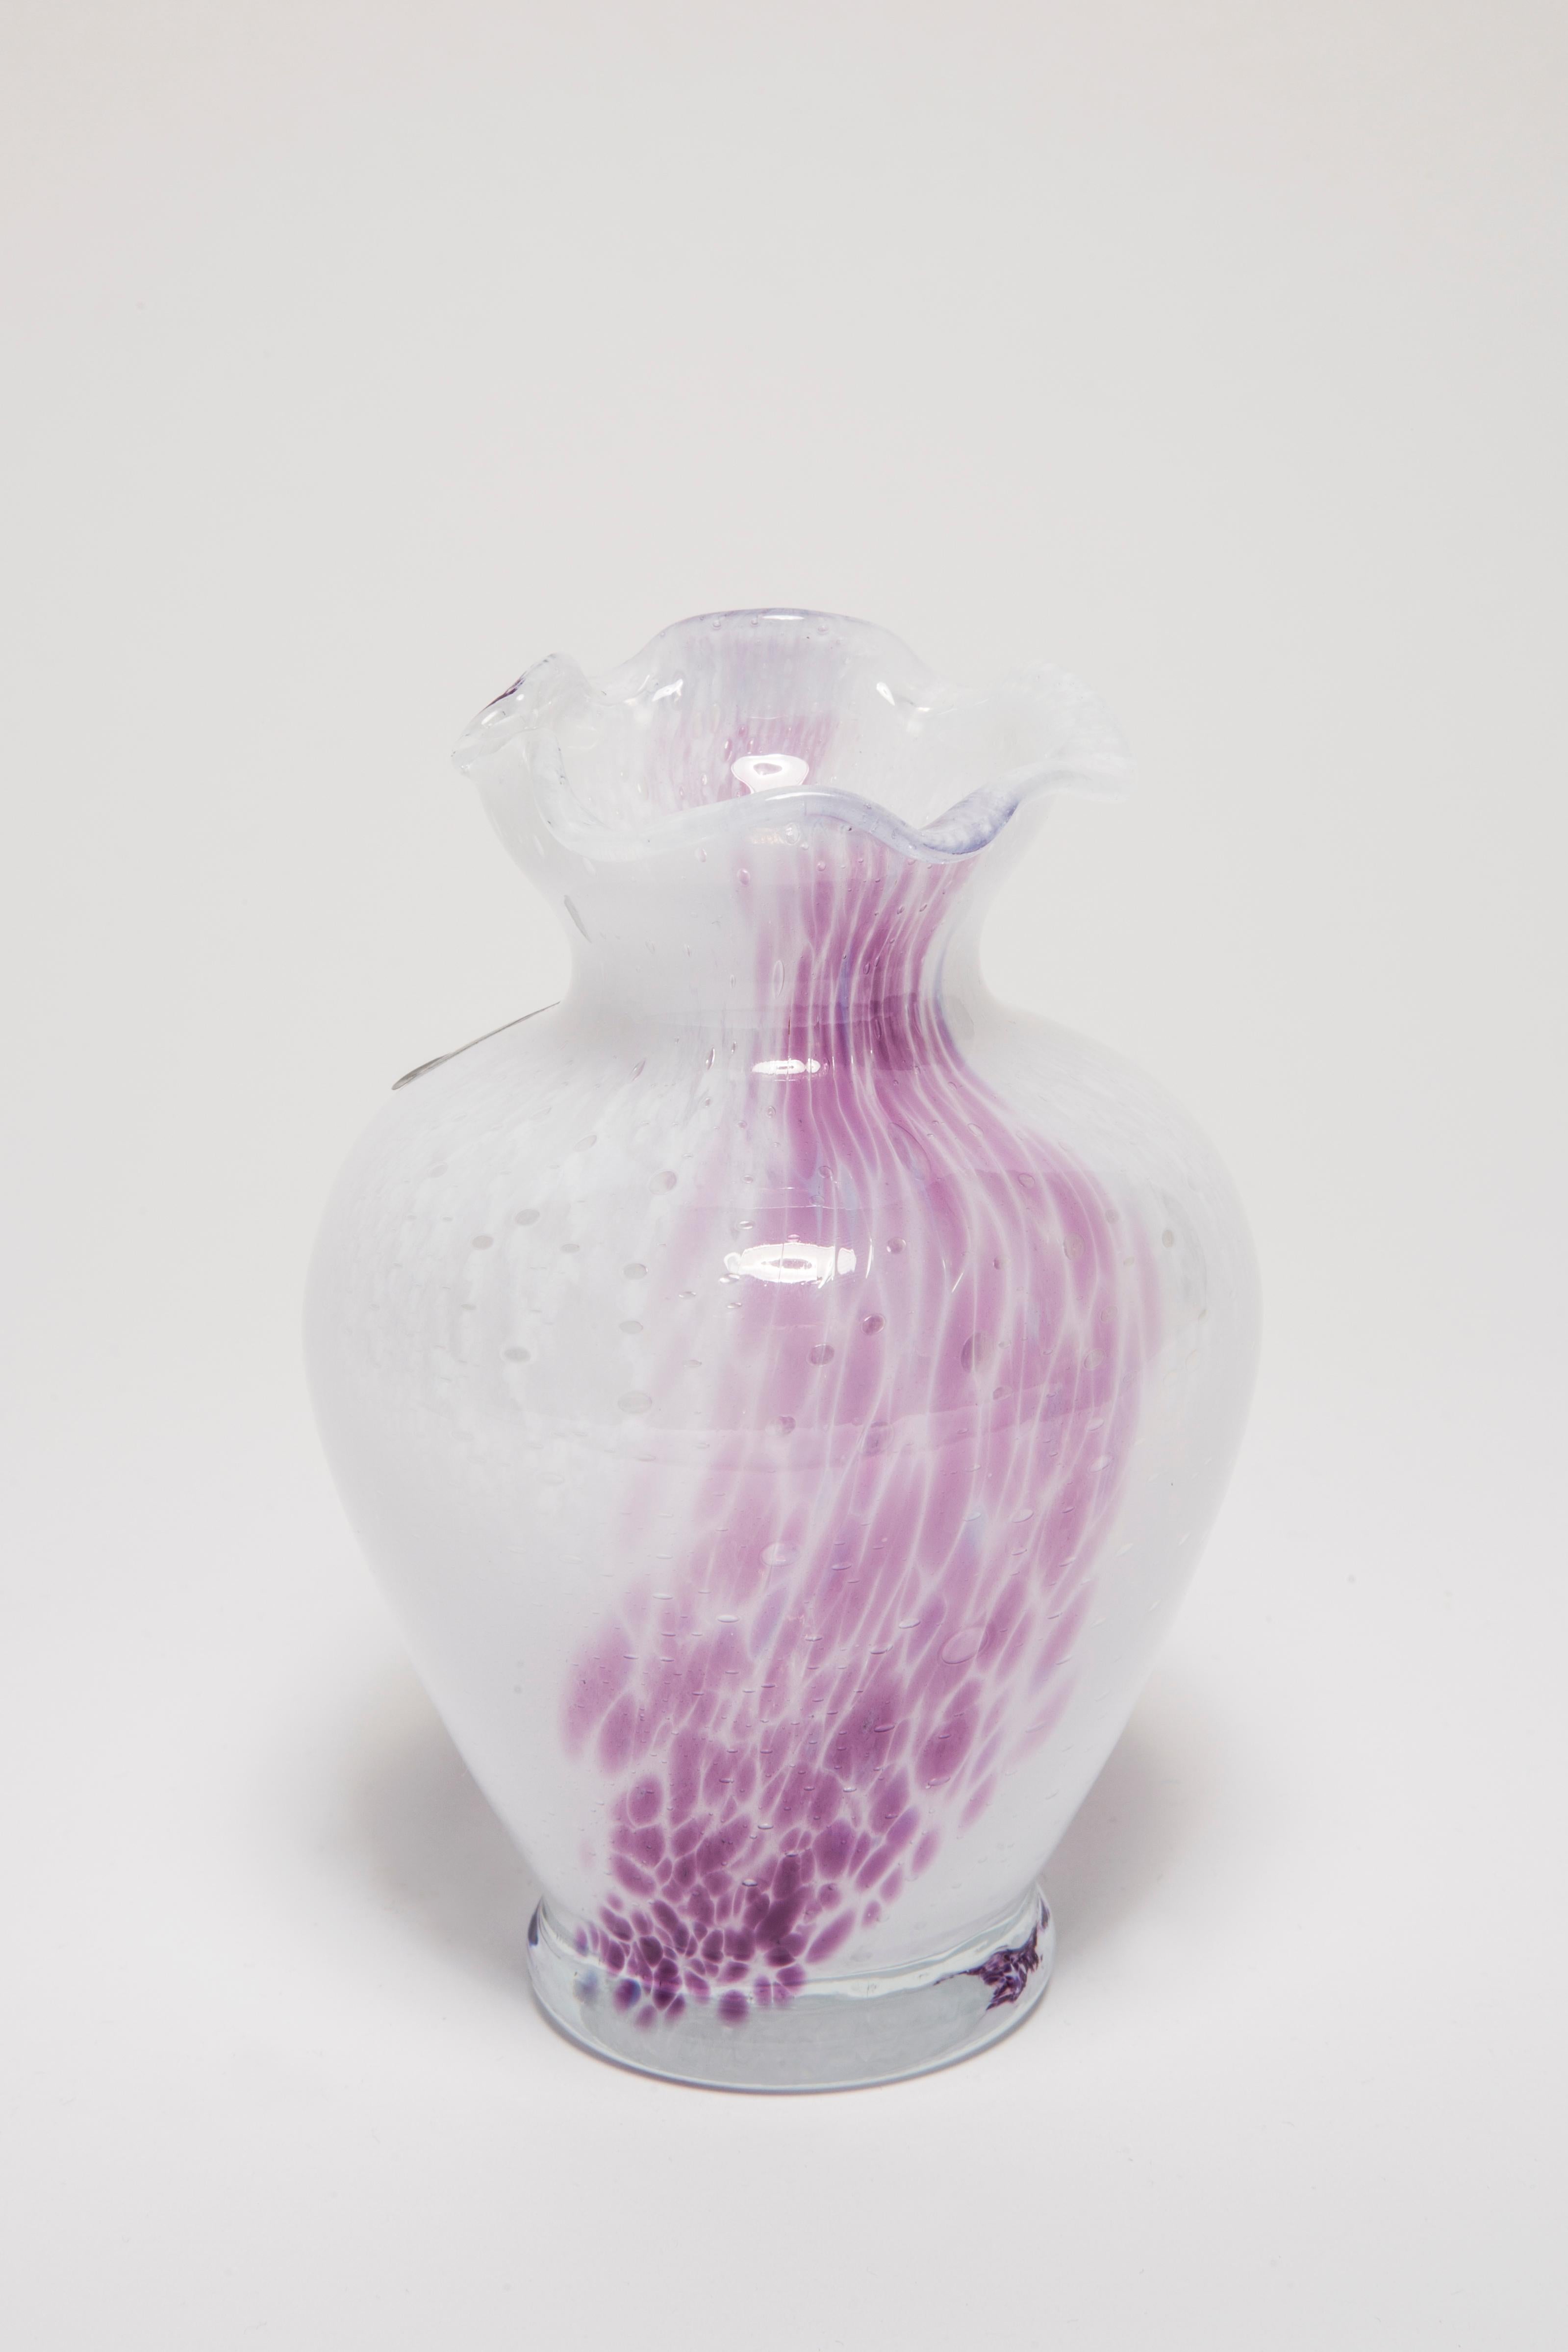 Mid Century Vintage White and Purple Small Murano Vase, Italy, 1960s For Sale 3